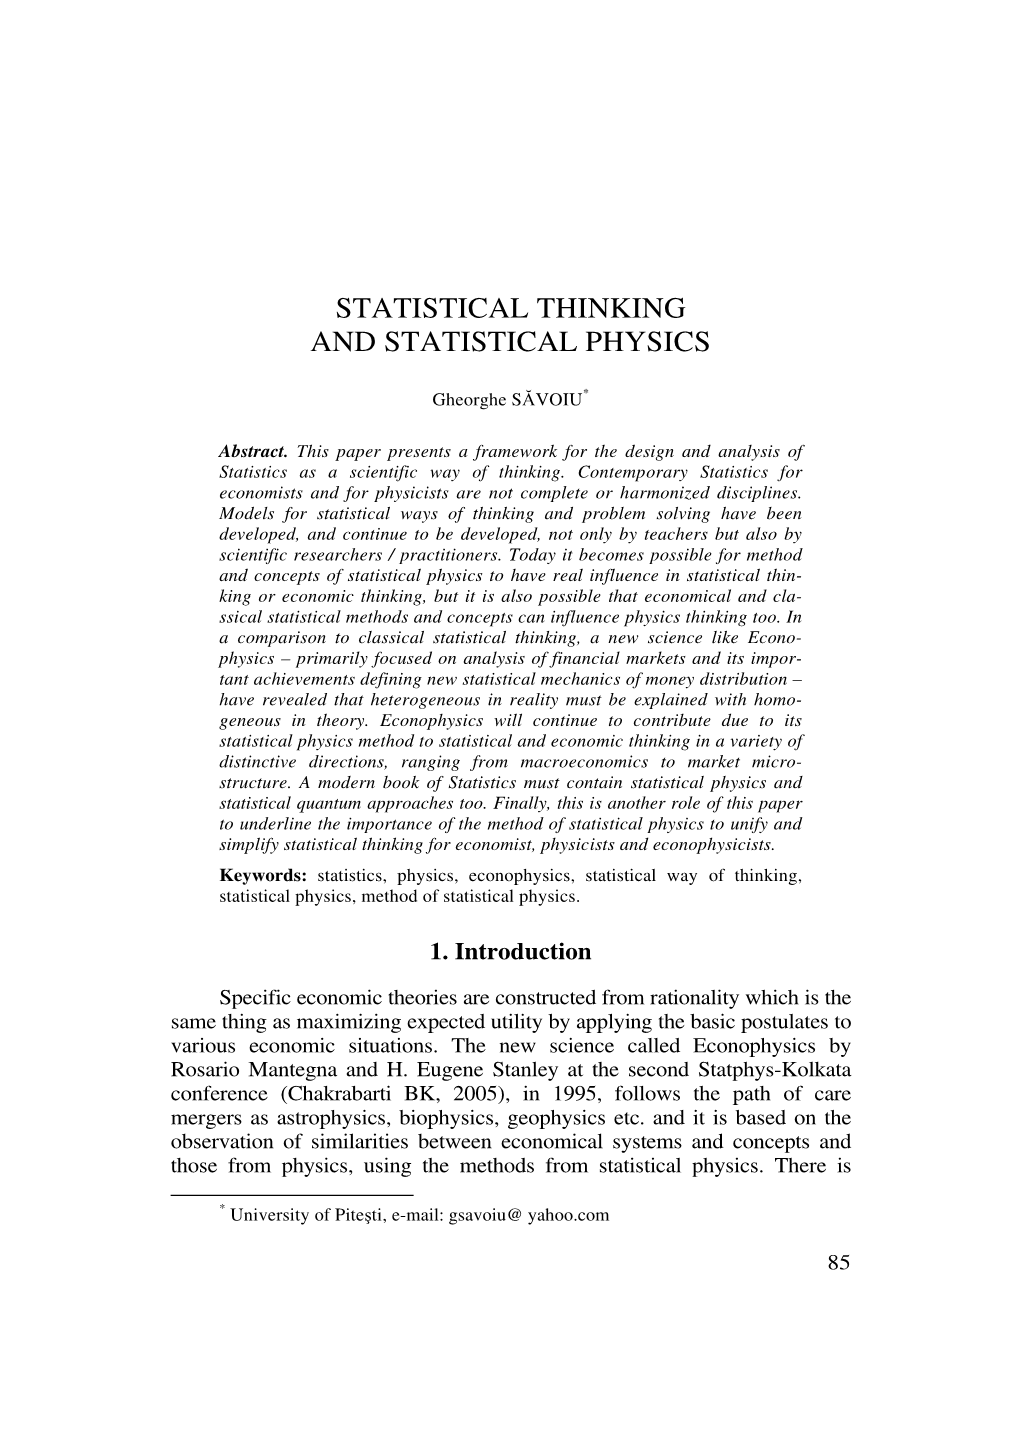 Statistical Thinking and Statistical Physics